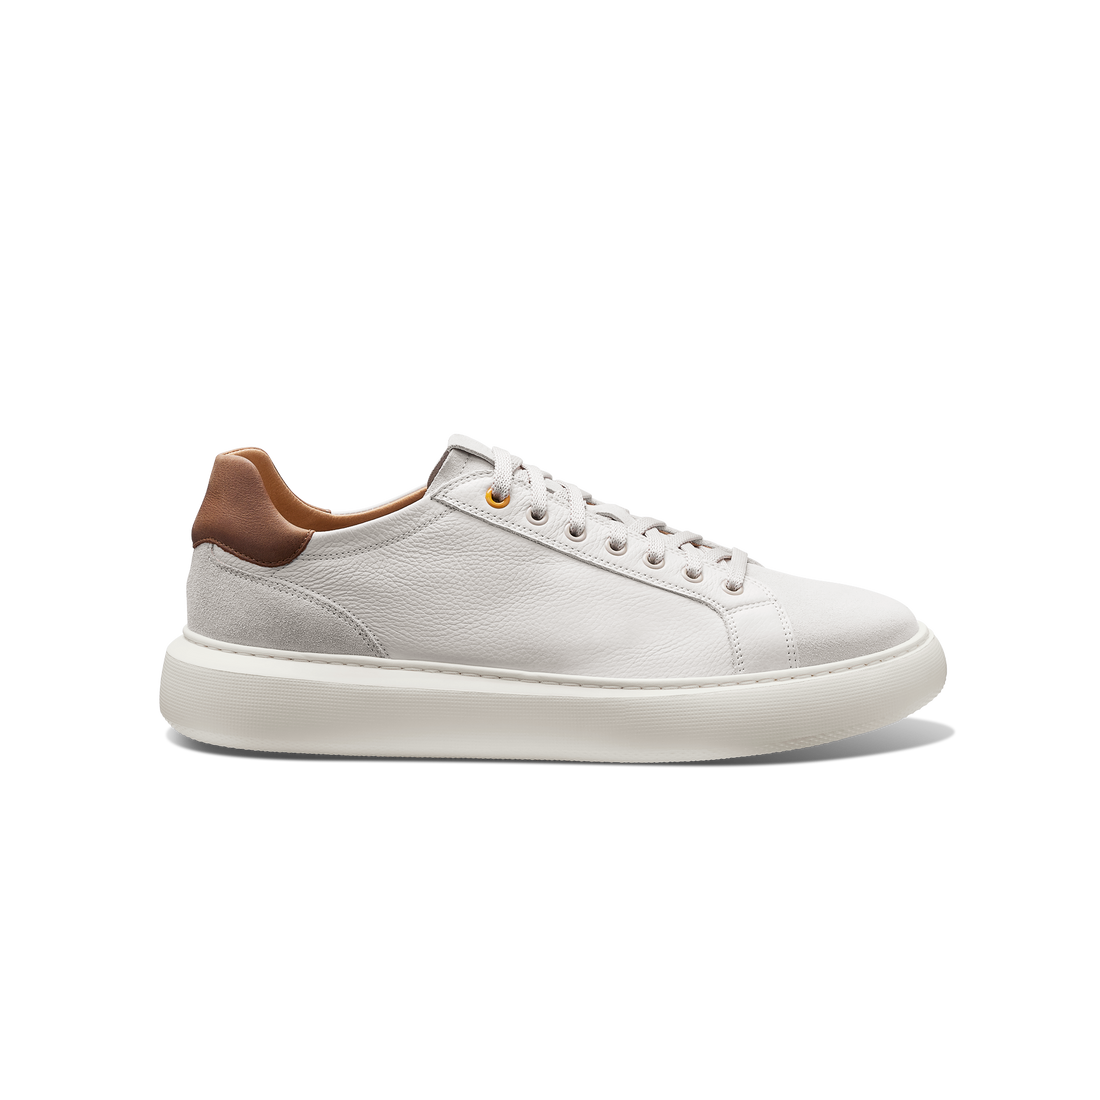 Sunset Sneaker | Men's Modern Leather Sneakers | Taupe Leather